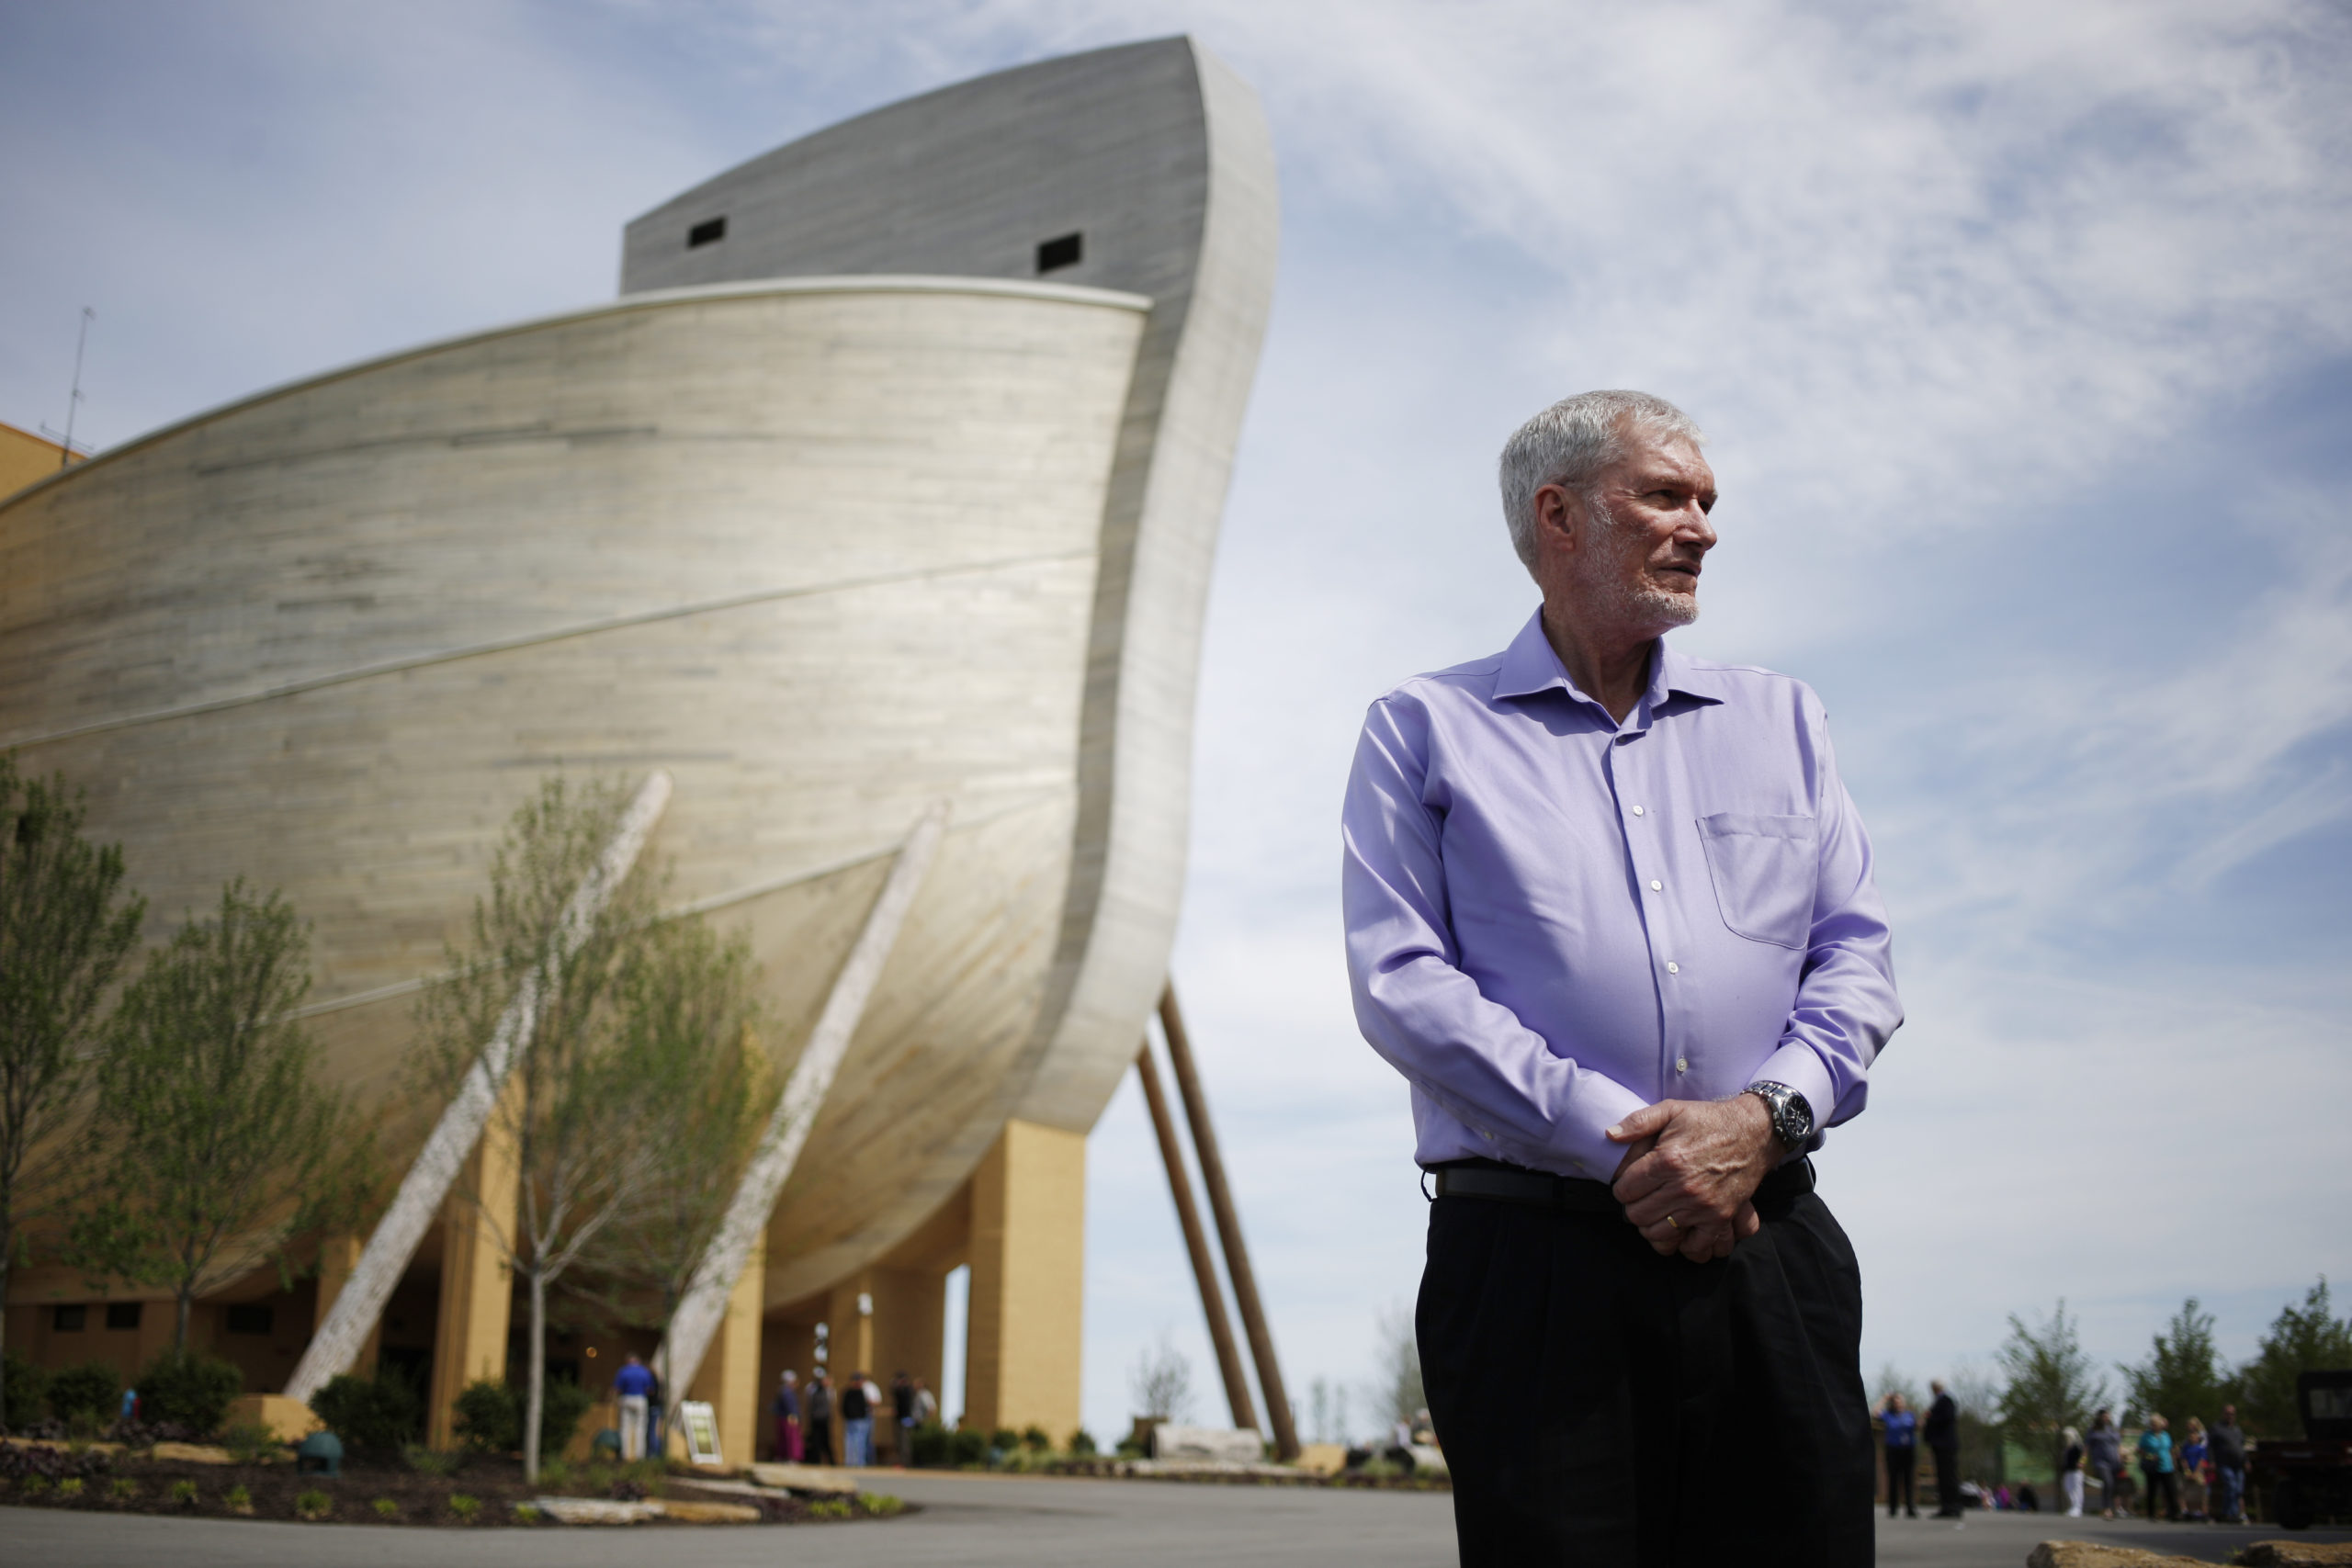 Raging homophobe sues insurance company because his life-size Noah’s Ark got rained on